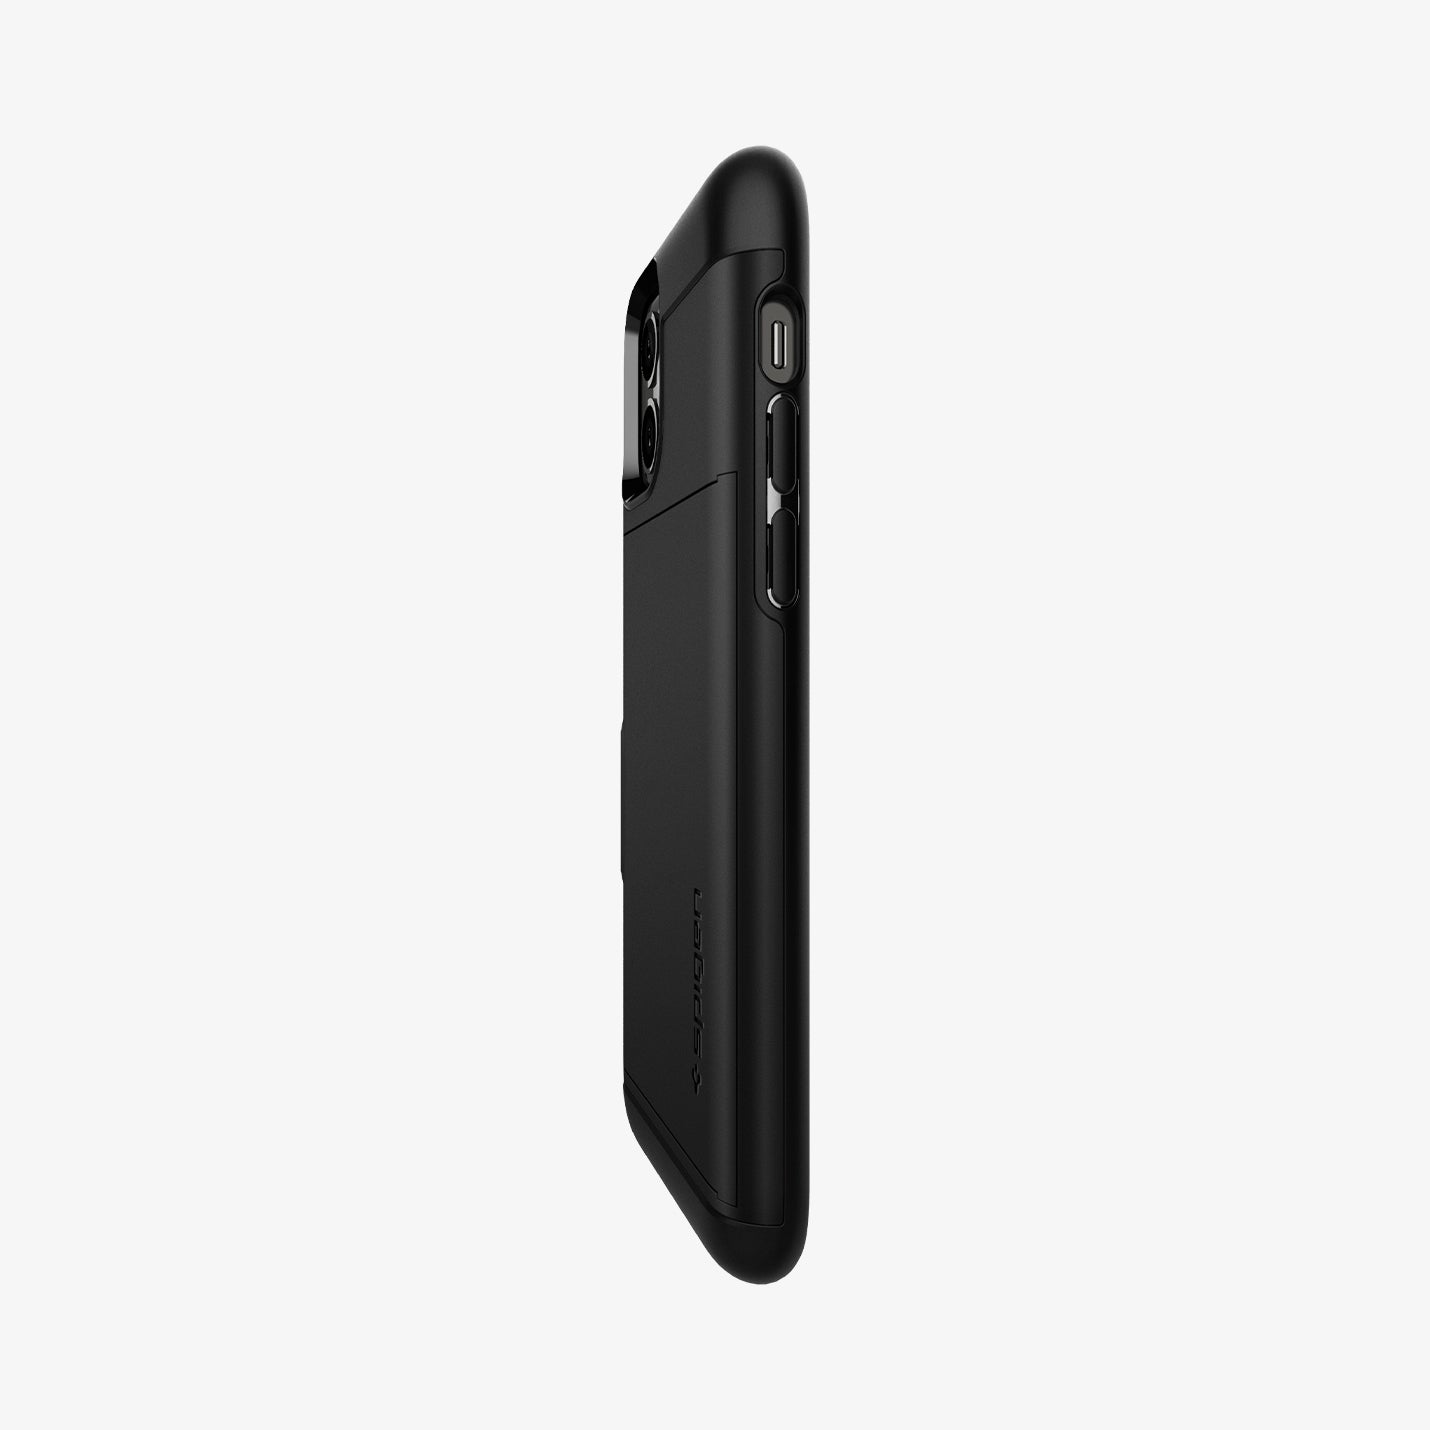 ACS01707 - iPhone 12 / iPhone 12 Pro Case Slim Armor CS in black showing the side and partial back